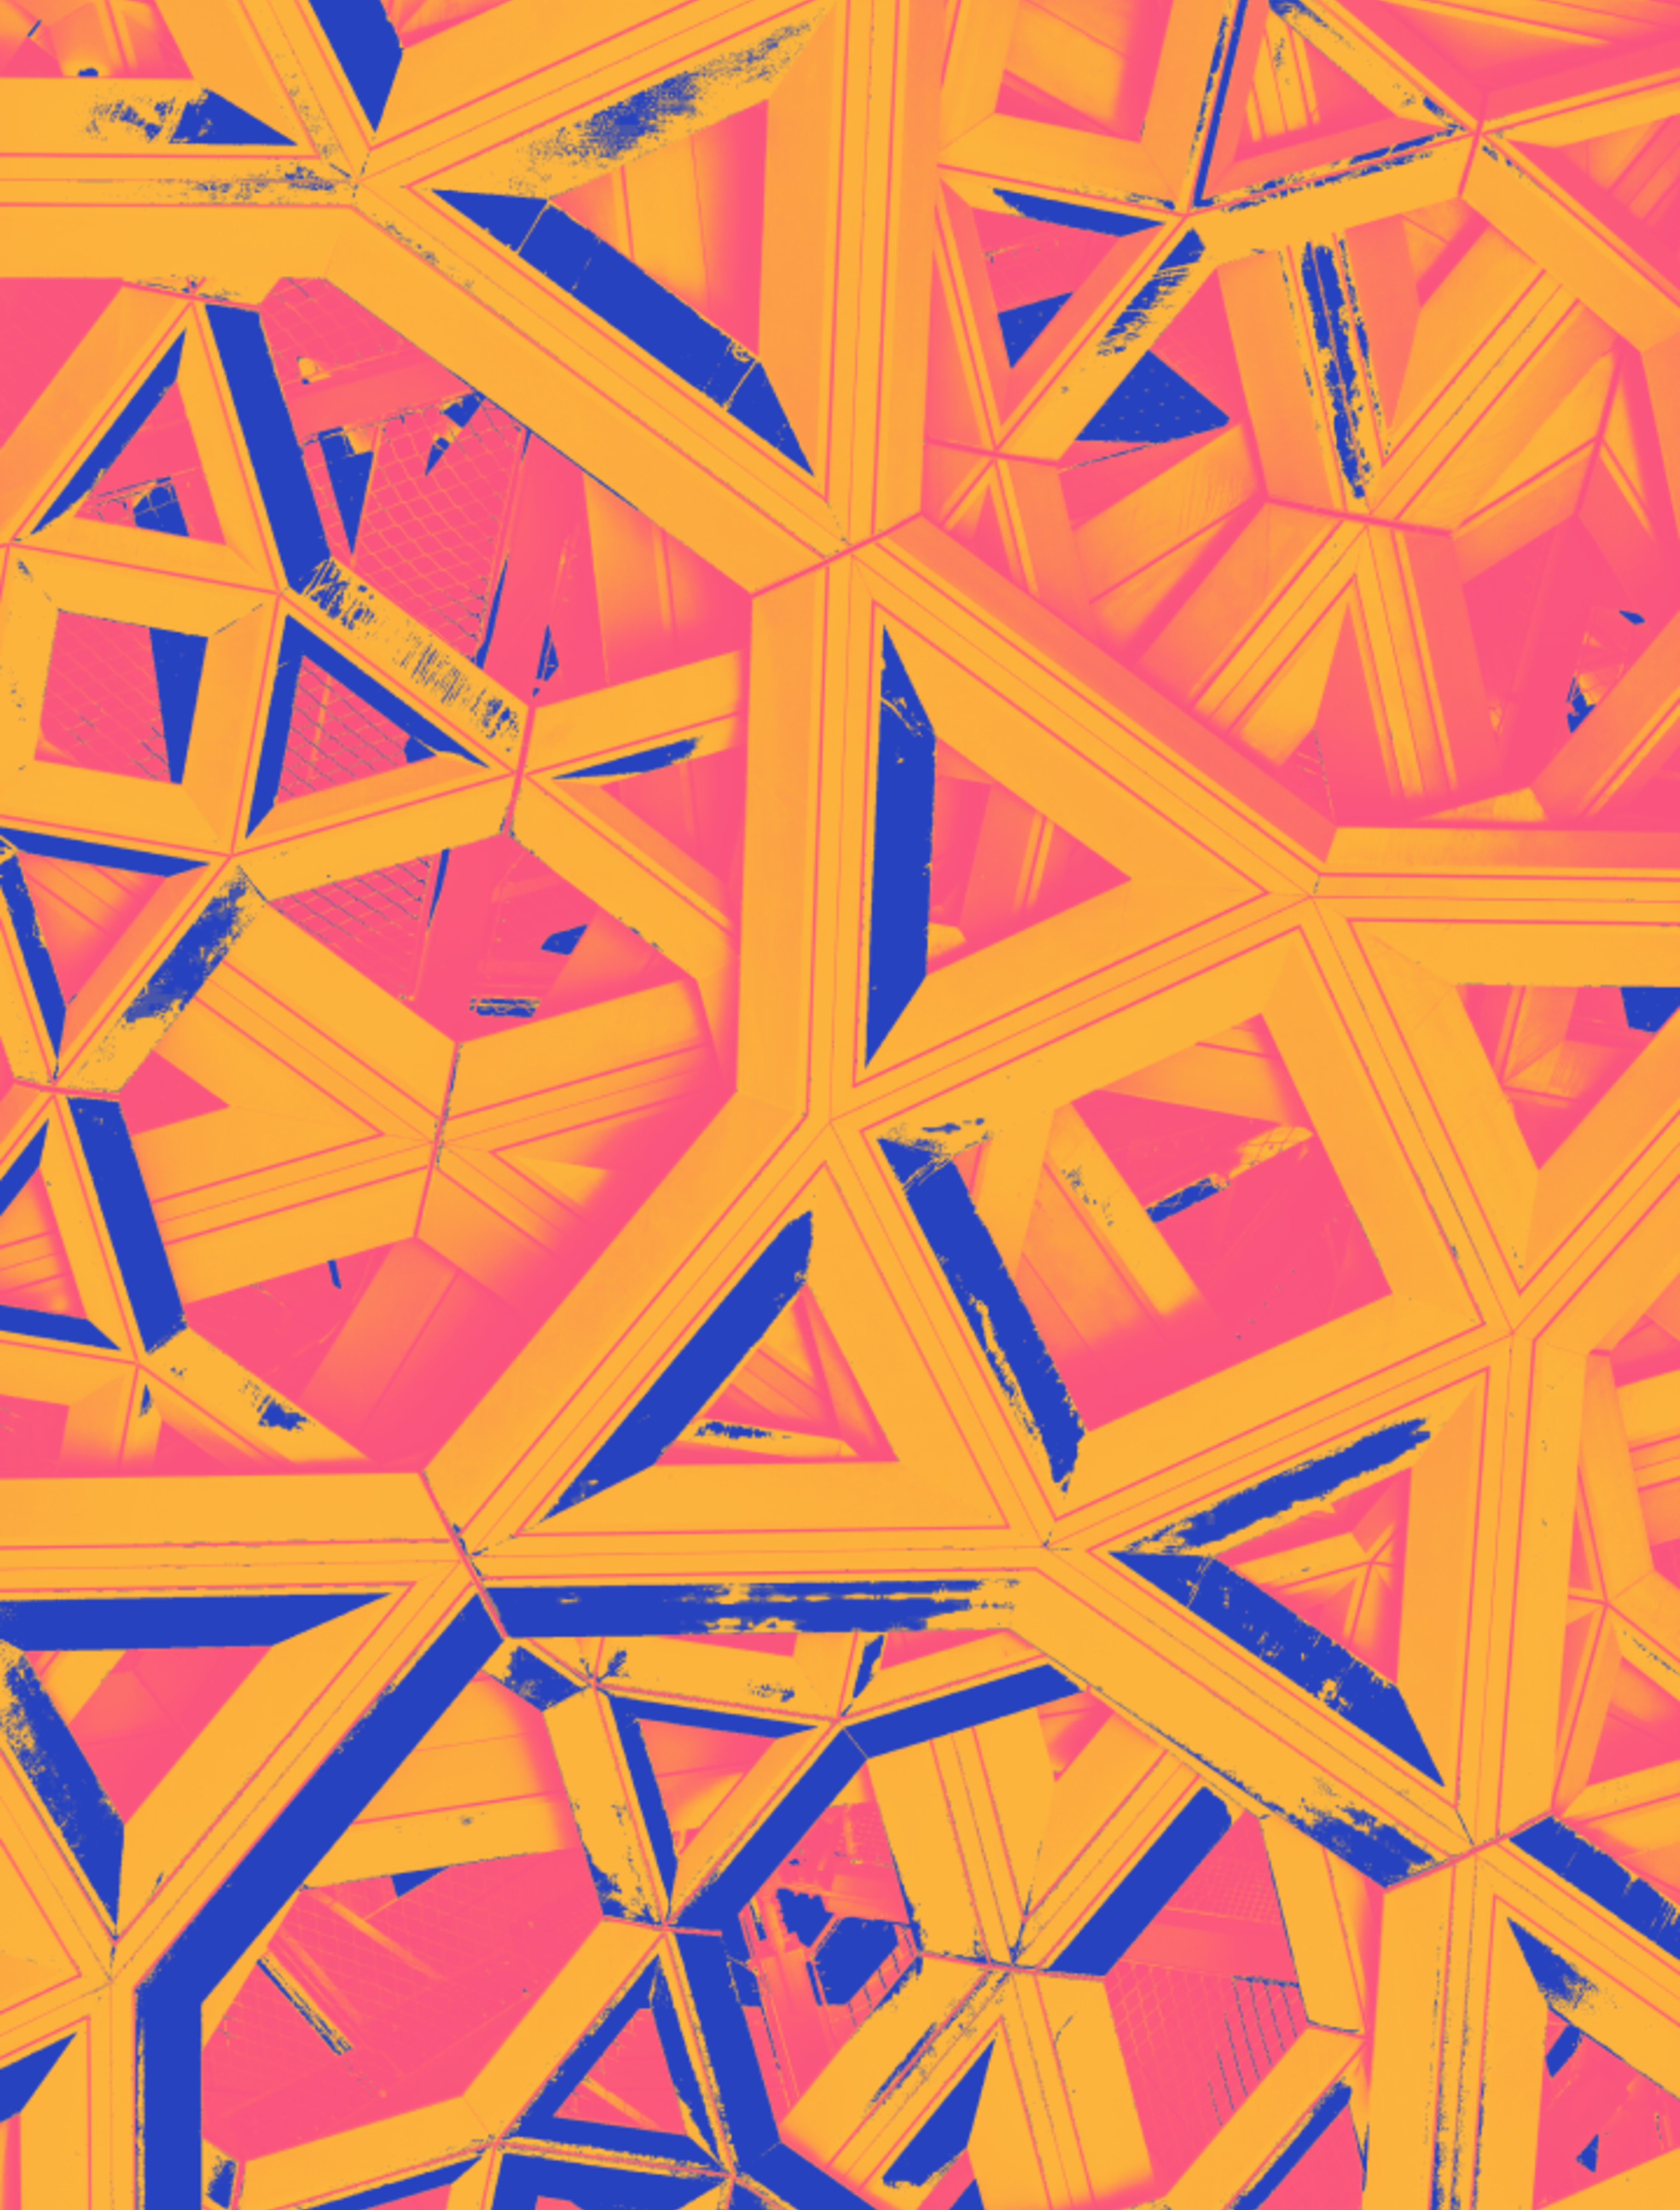 An abstract image of a geometric pattern.